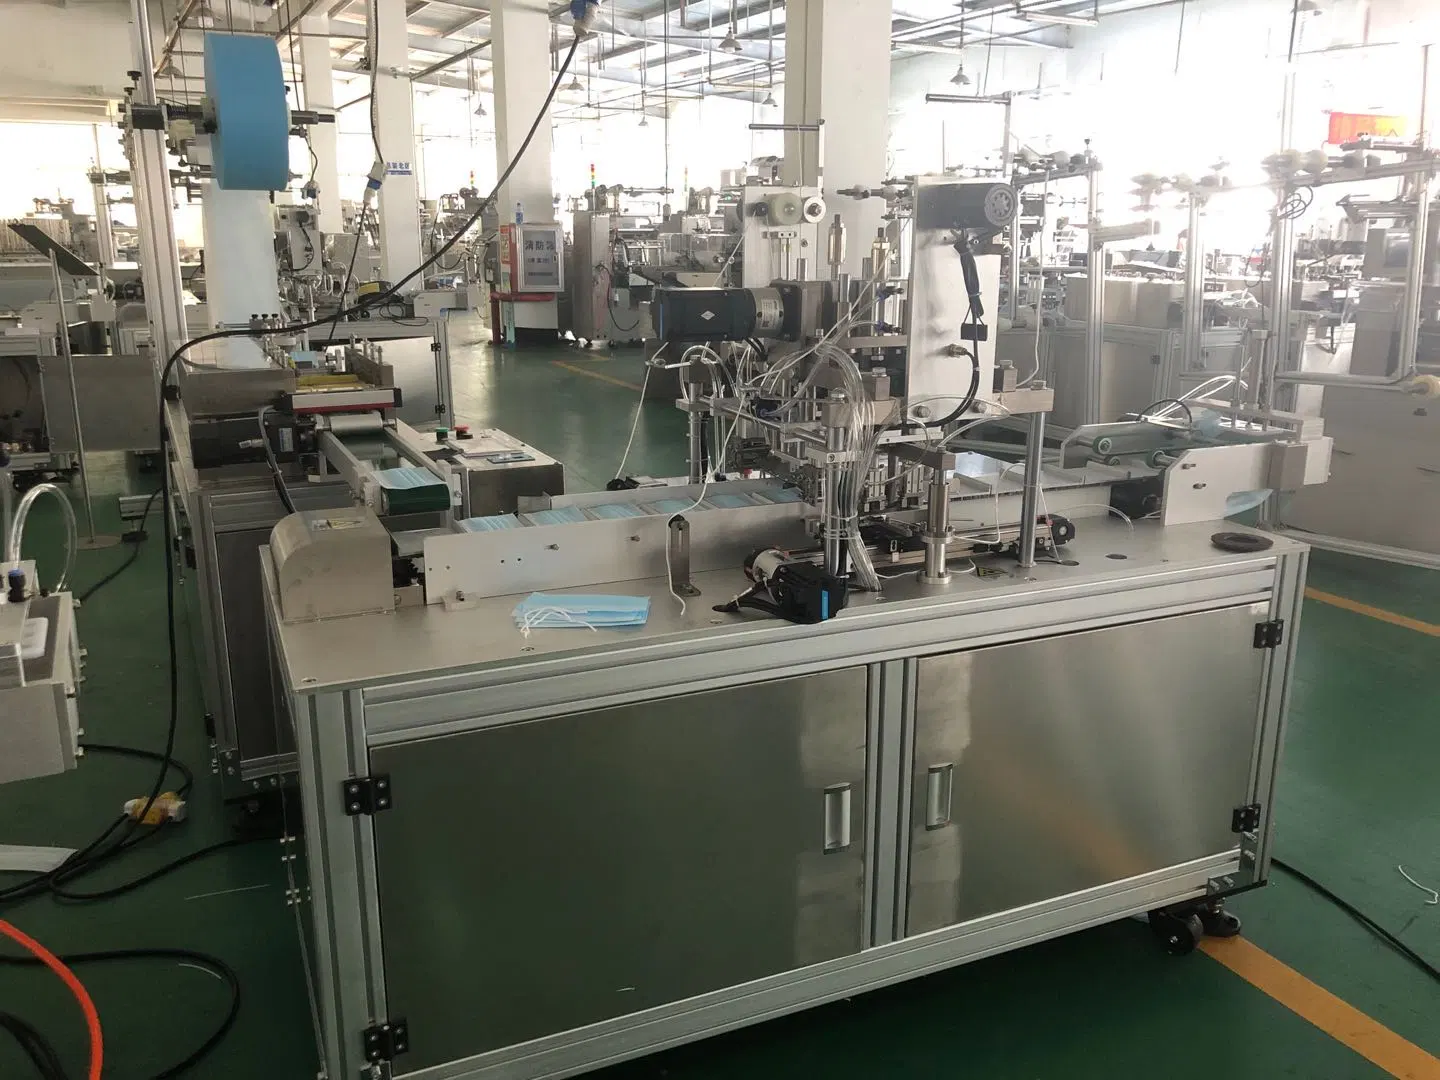 Surgical Facial Mask Making Machinery Equipment / 3 Ply Non-Woven Mask Produce Factory in China